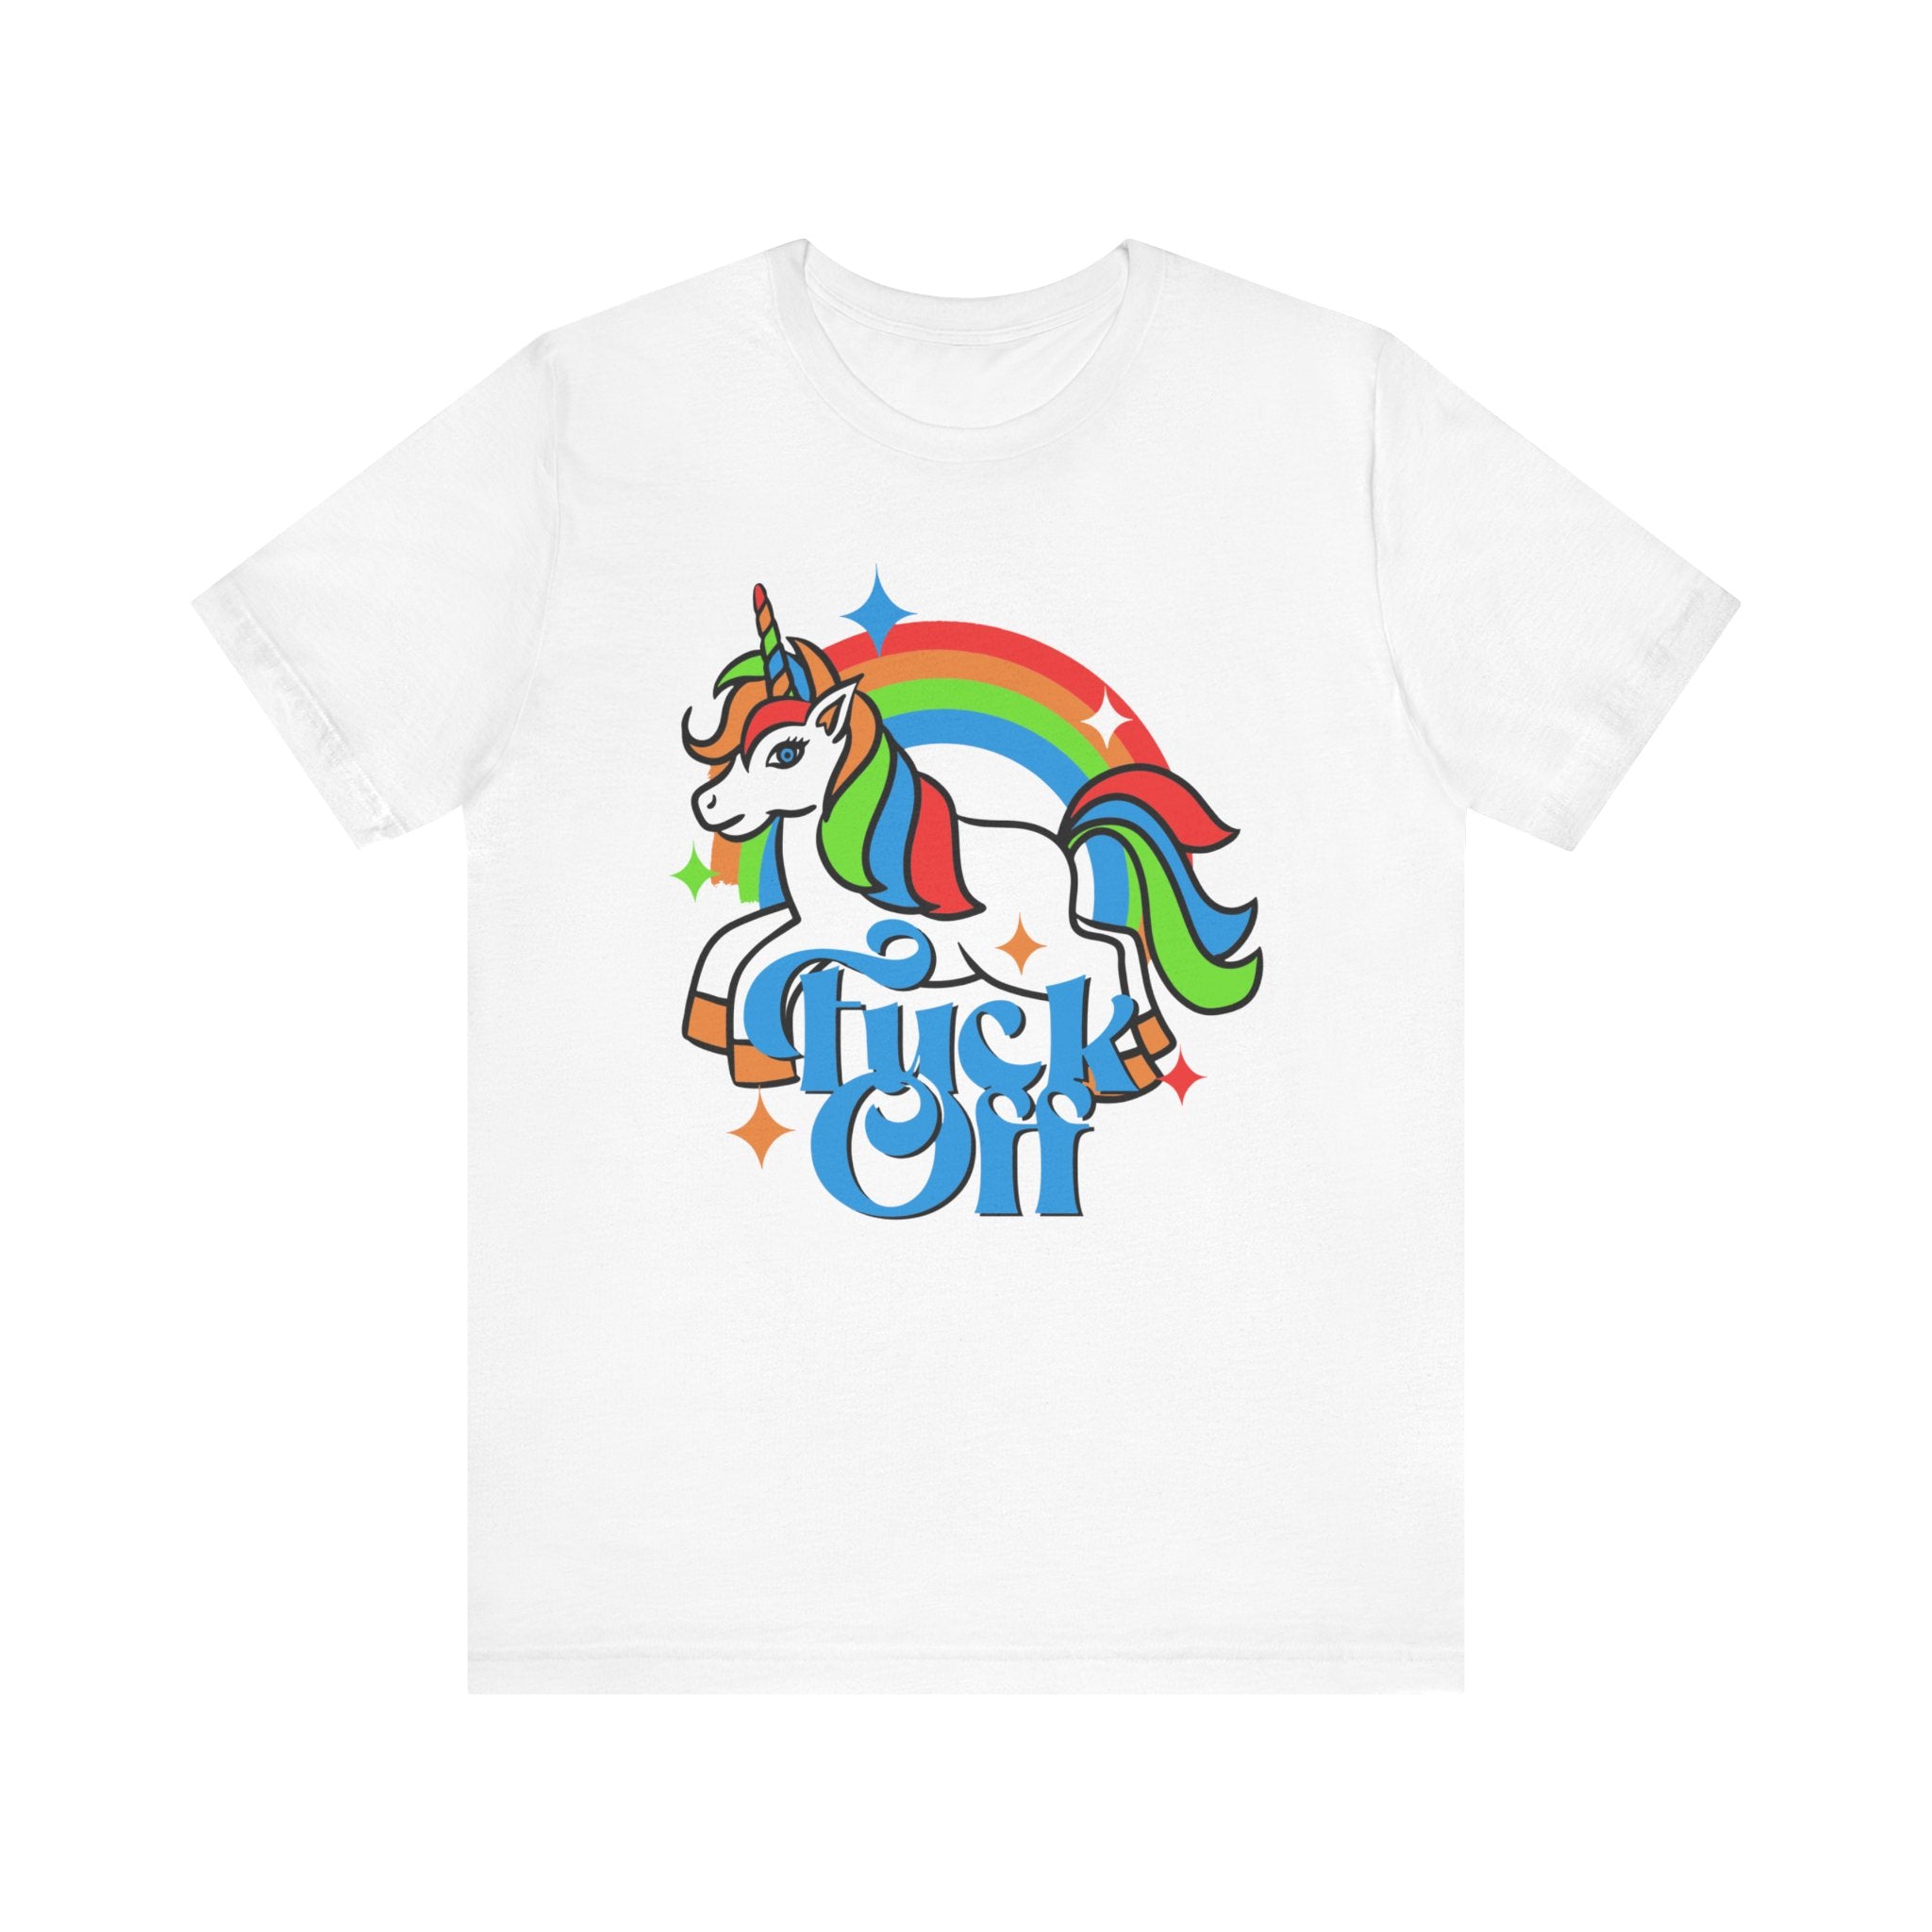 White cotton F off T-Shirt with a colorful graphic of a unicorn and a rainbow, and the text "chill out" in a playful font.